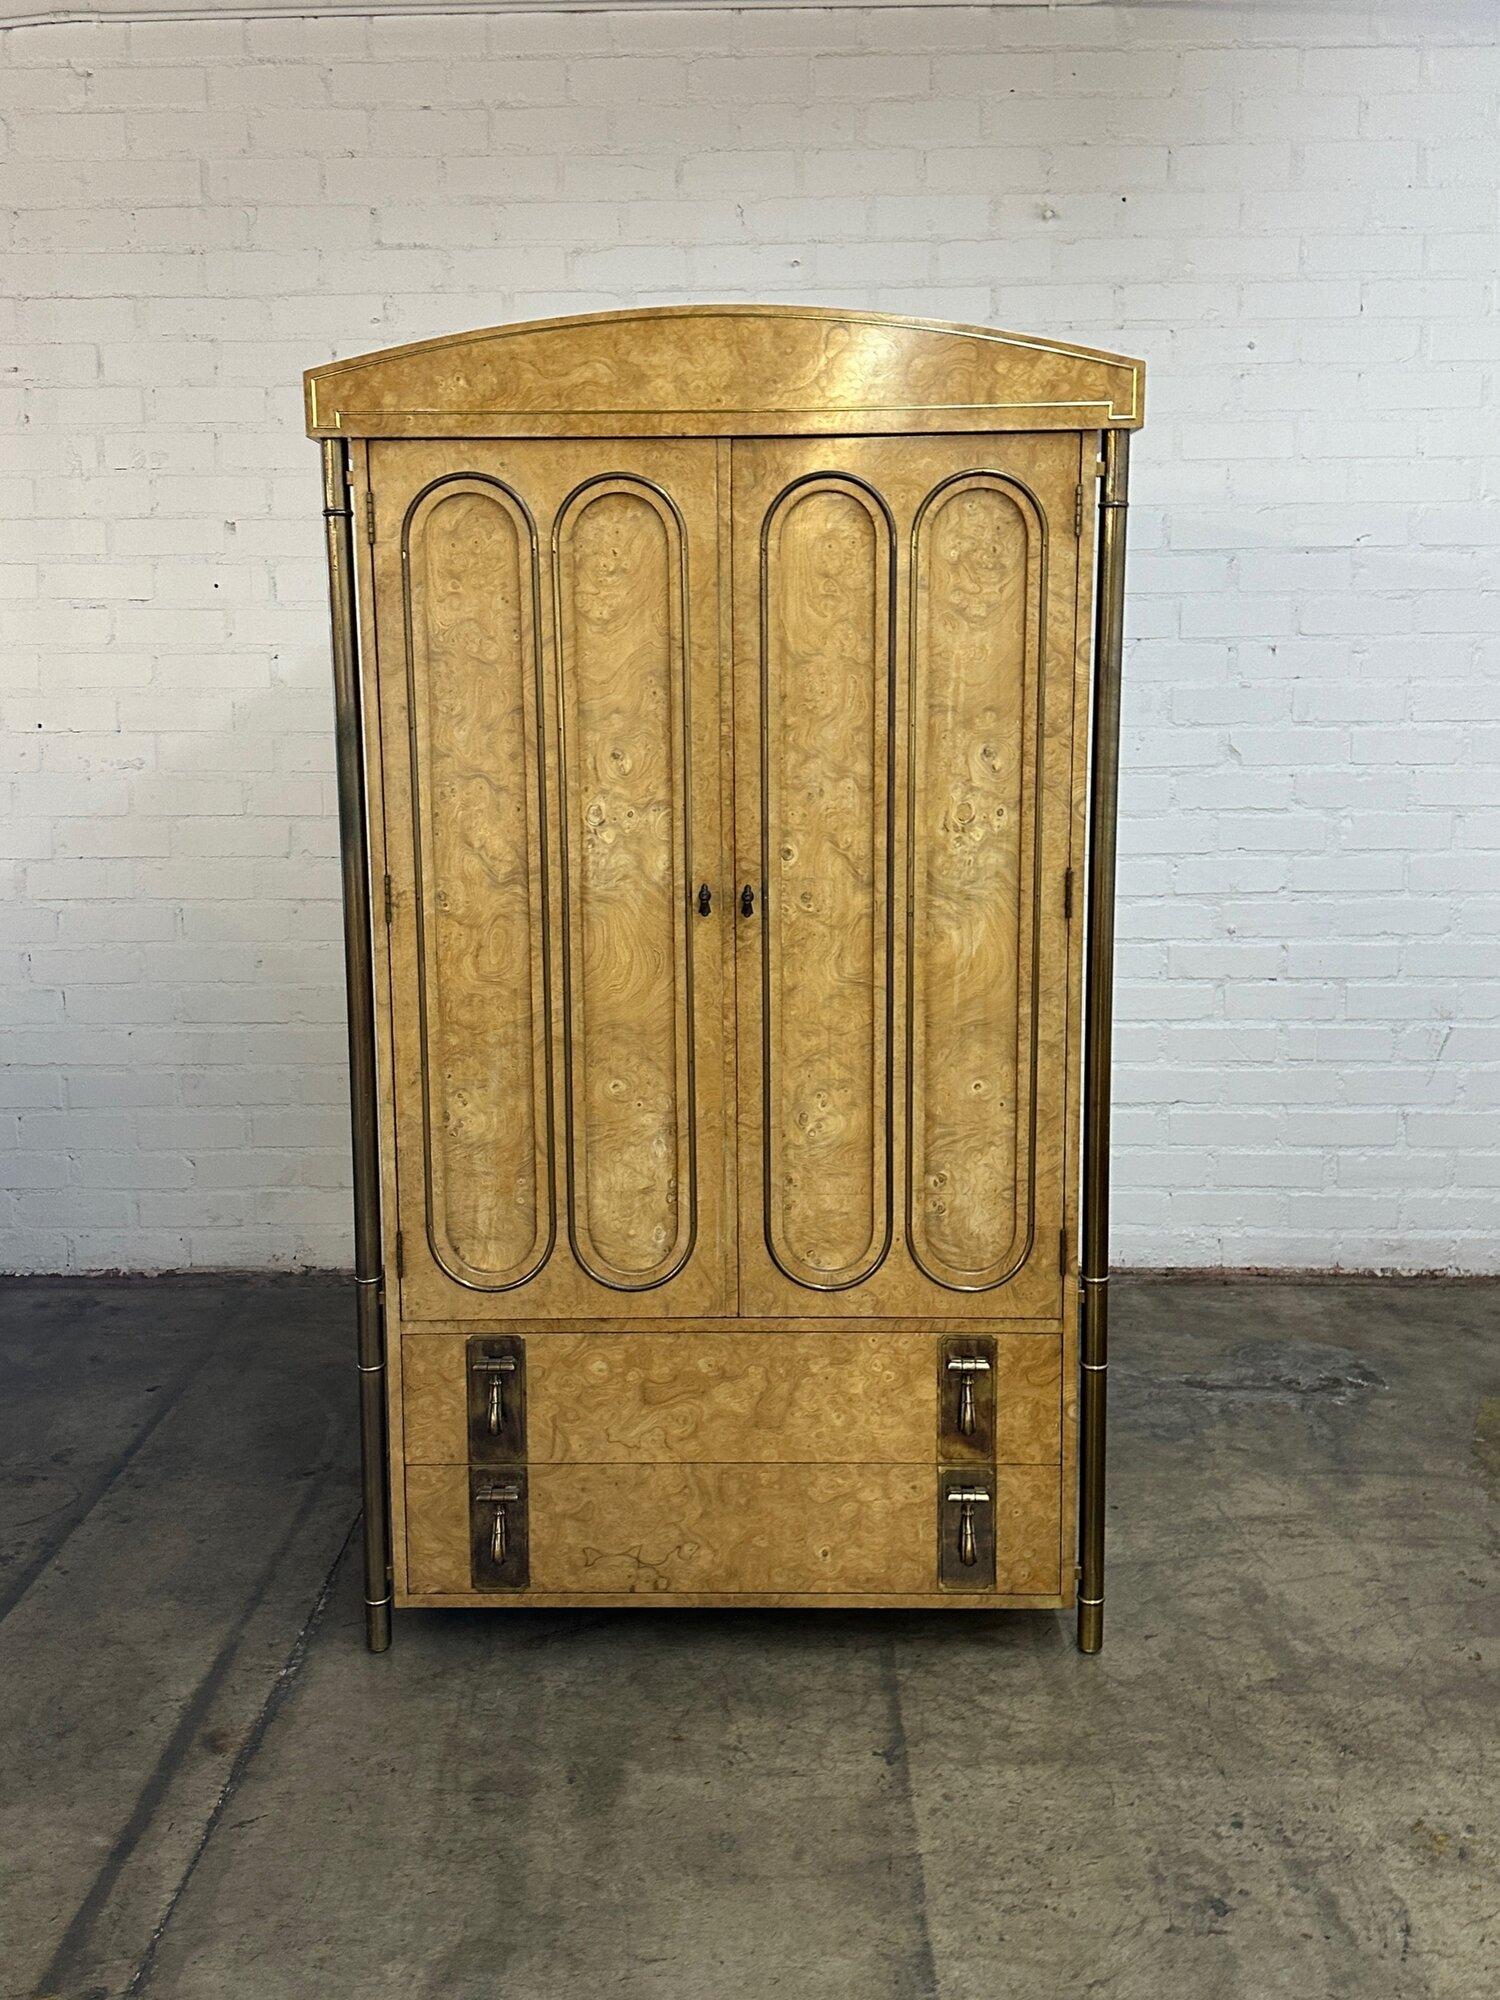 W44 D17.5 H77.5

1940’s Art Deco Burl Wood Armoire with original Brass hardware. Item is in great vintage condition, fully functional and sturdy. 